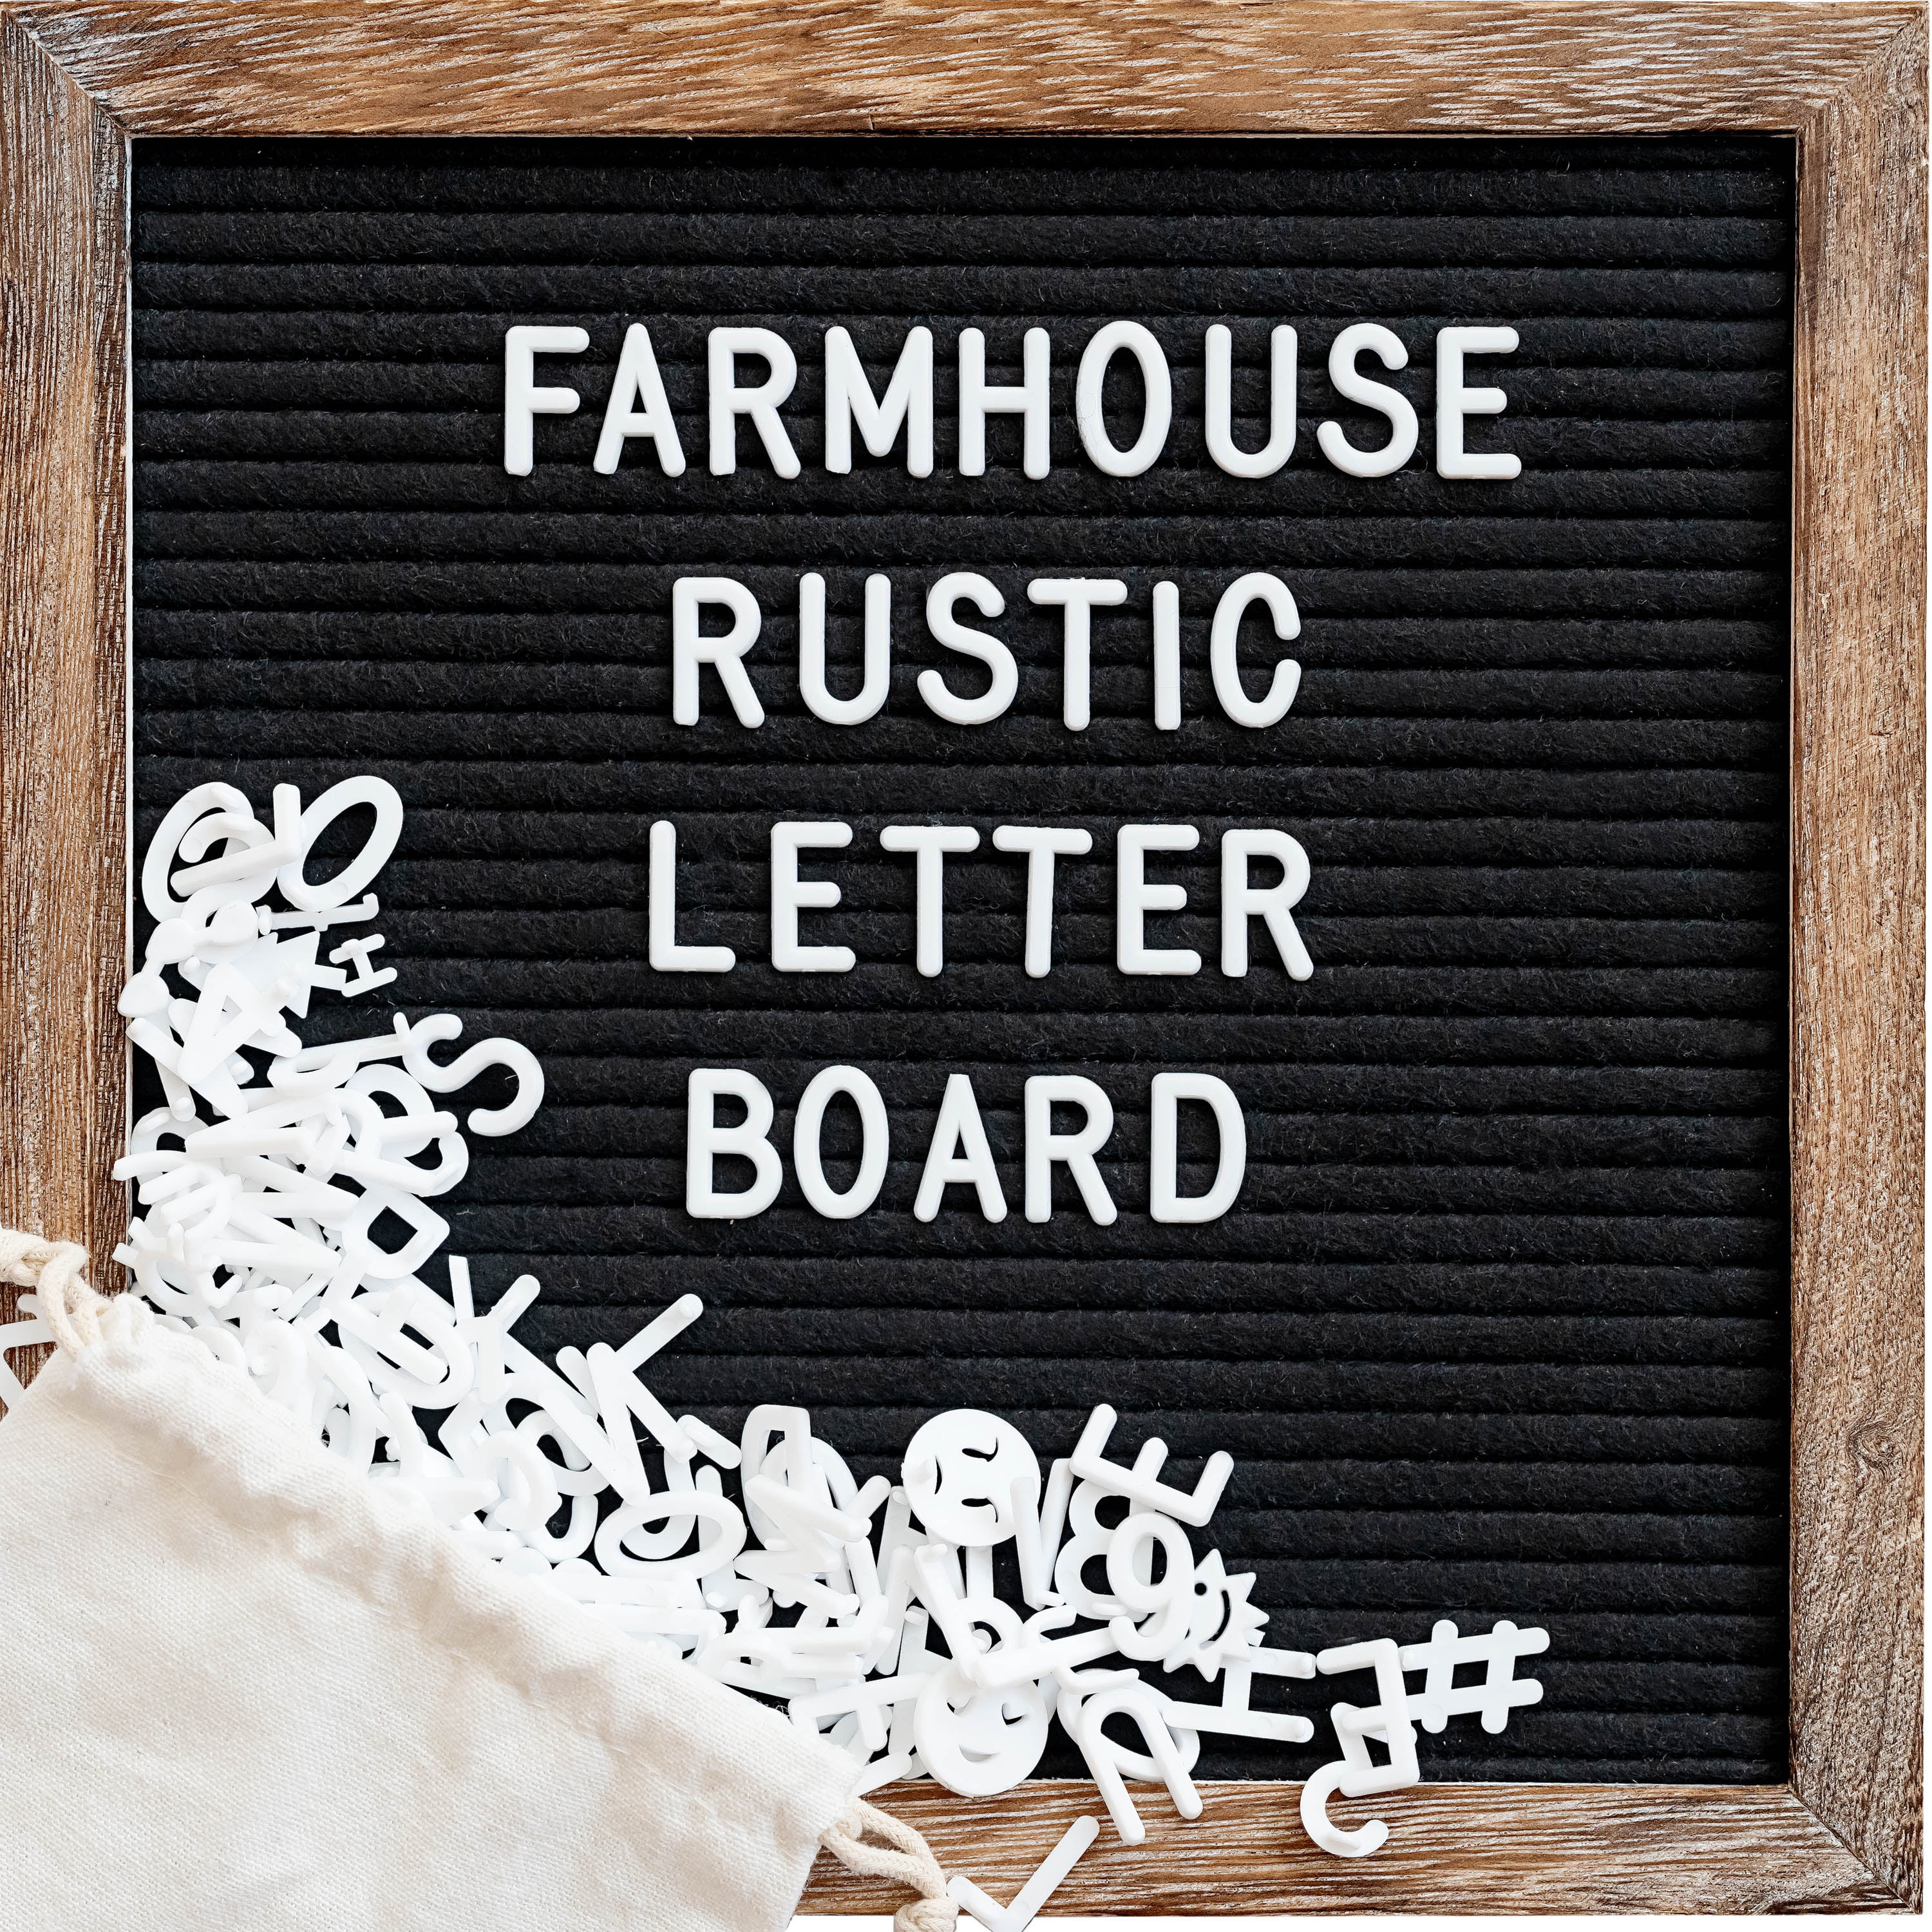 16 x 12 Rustic Wood Frame Message Board with Changeable Letter Boards Christmas Felt Letter Board with Letters 